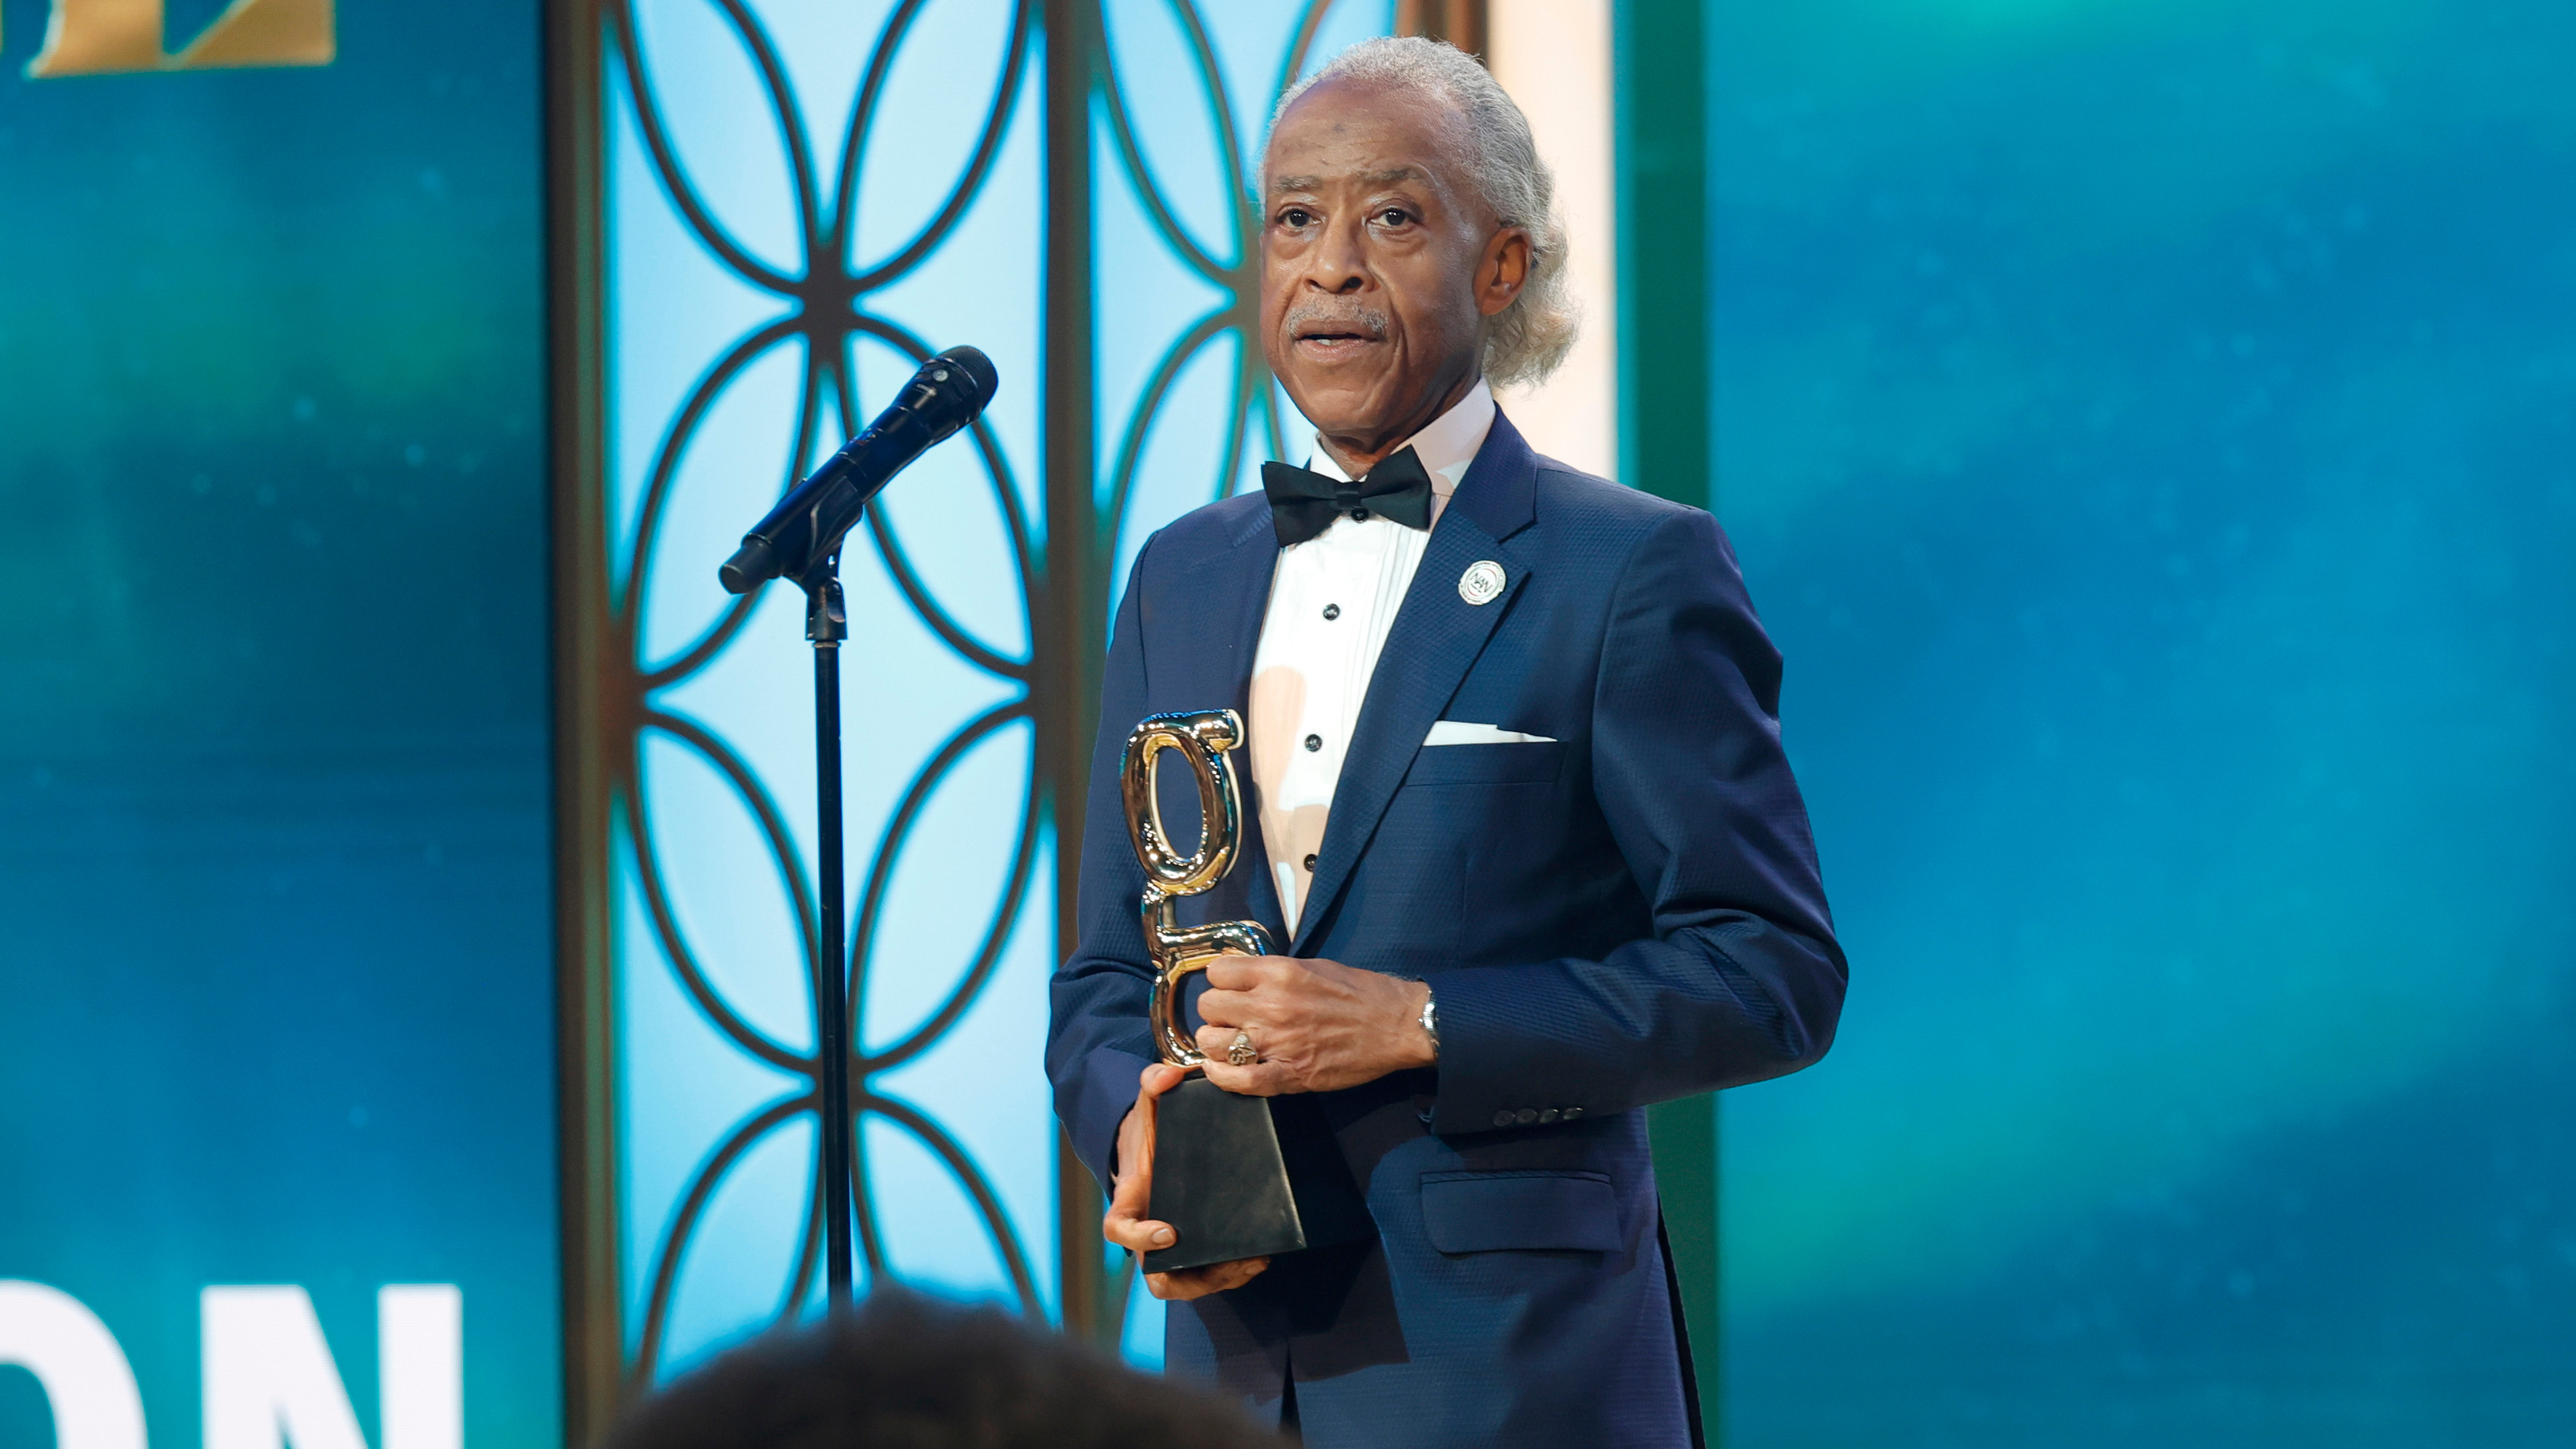 Rev. Al Sharpton’s Justice Icon Award honors decades of fighting on behalf of Black people